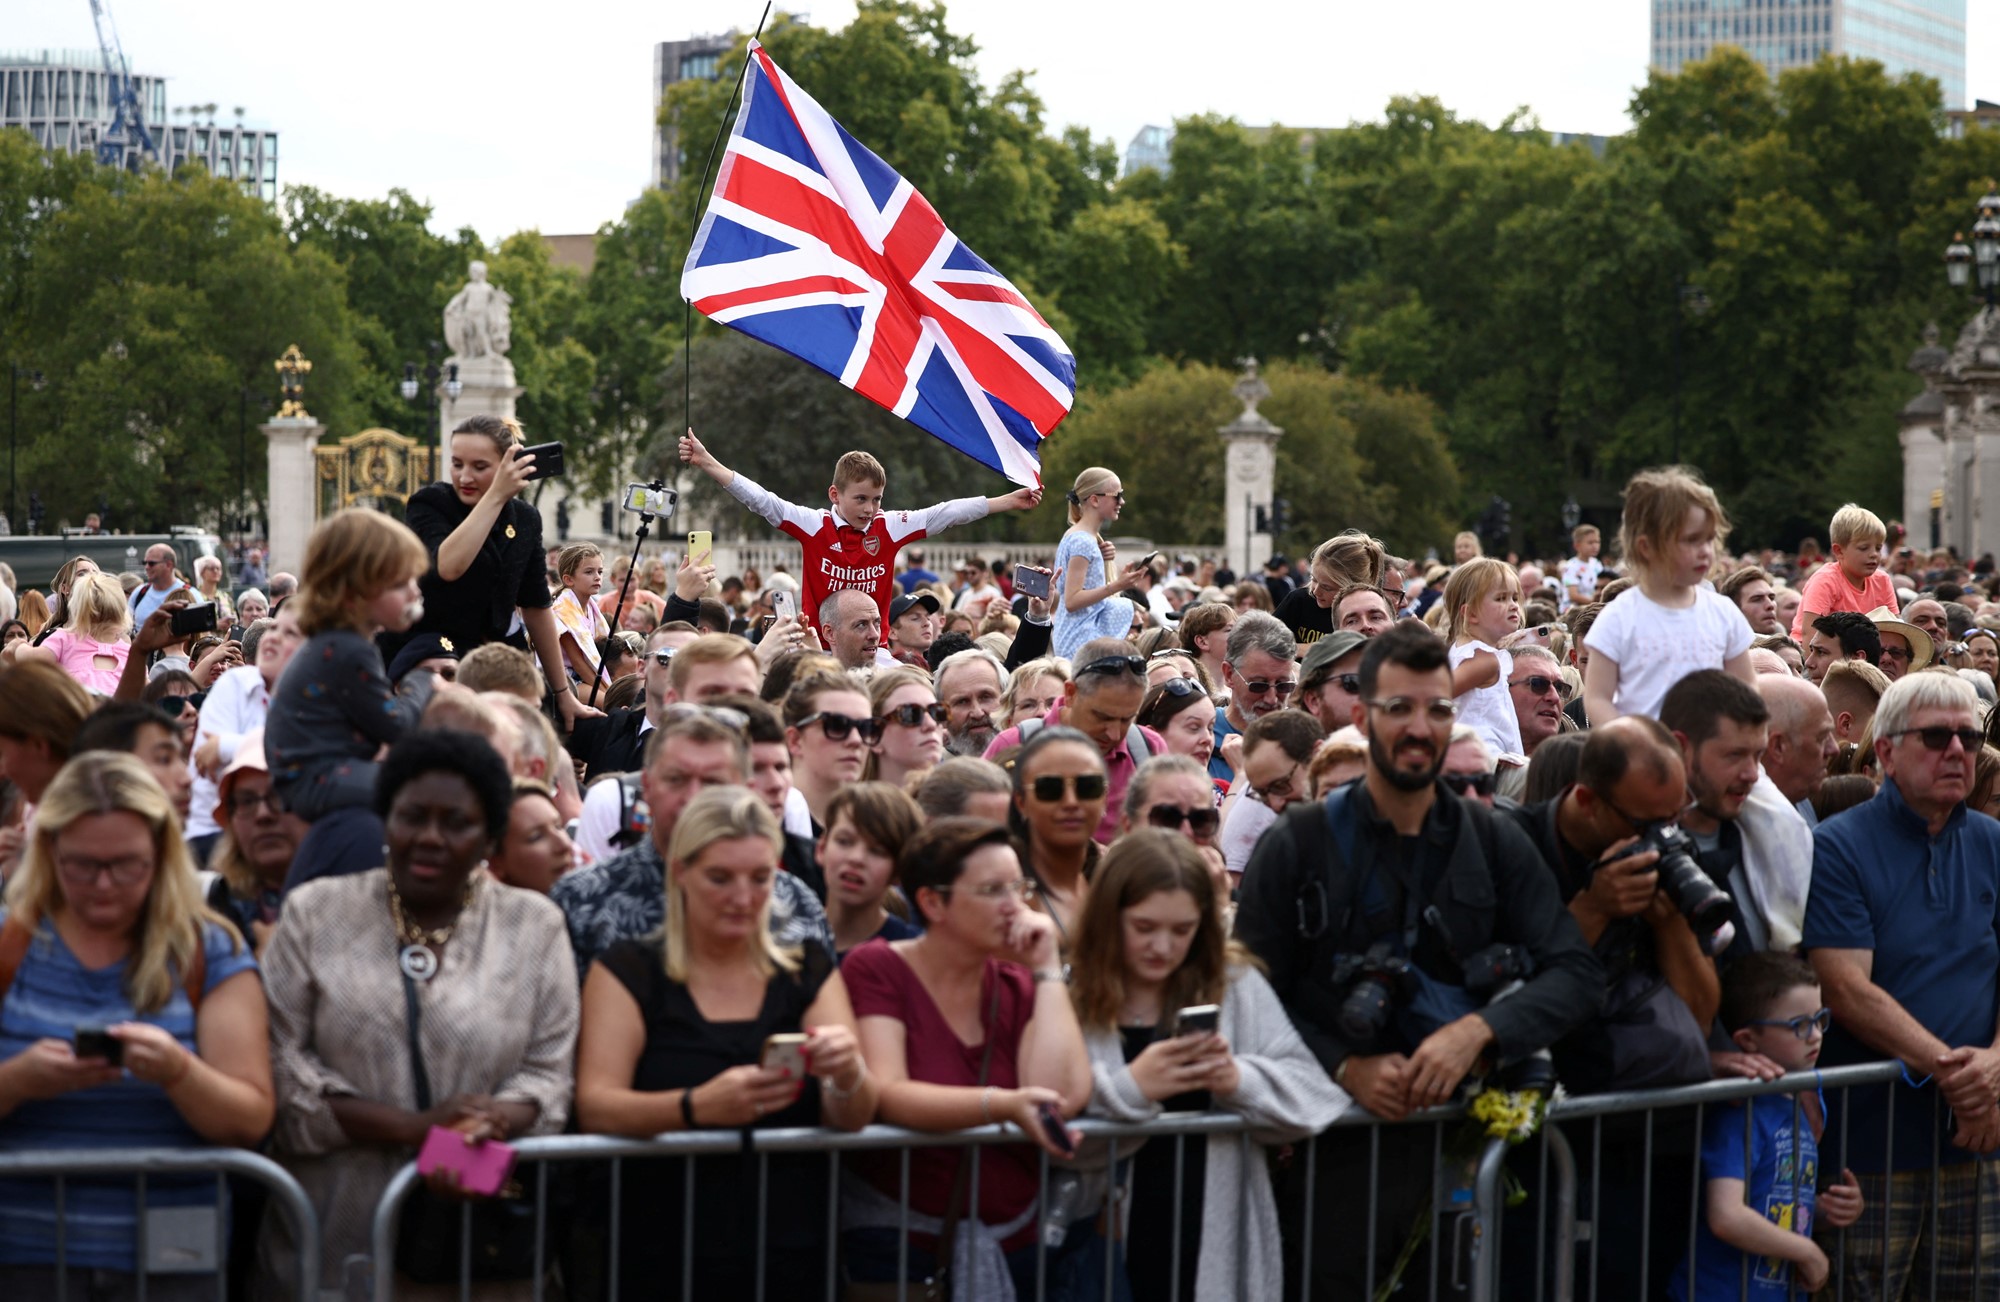 A crowd of people is waiting for King Charles III to arrive. A young boy is waving the British flag above the crowd.